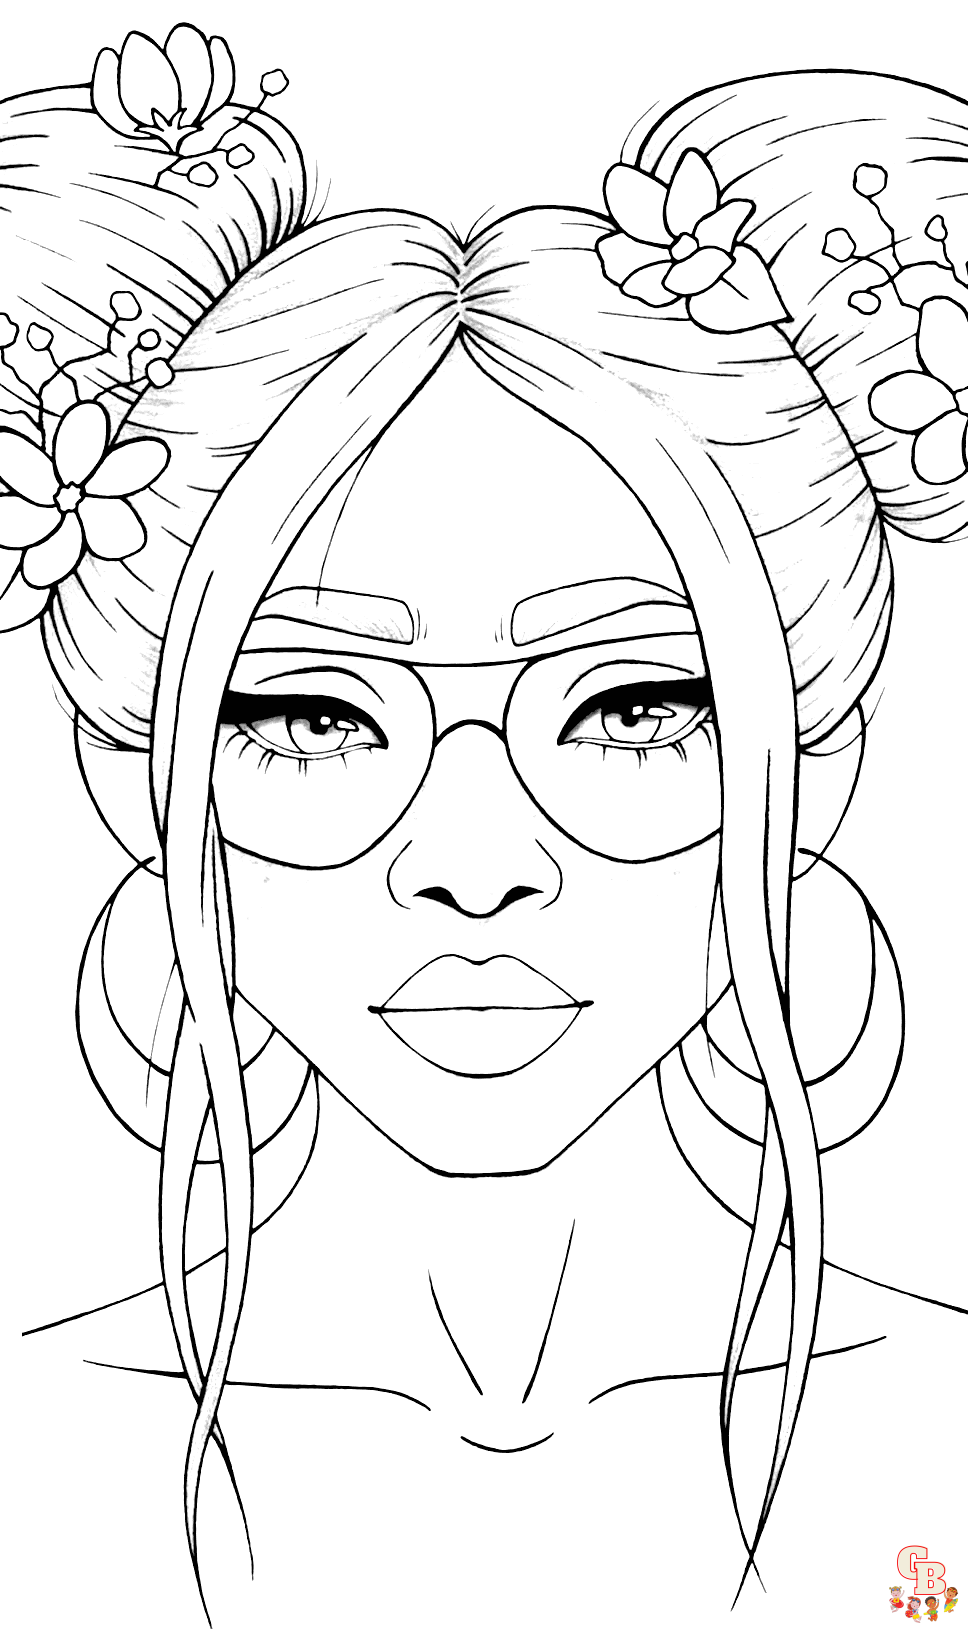 People coloring pages discover the joy of coloring characters